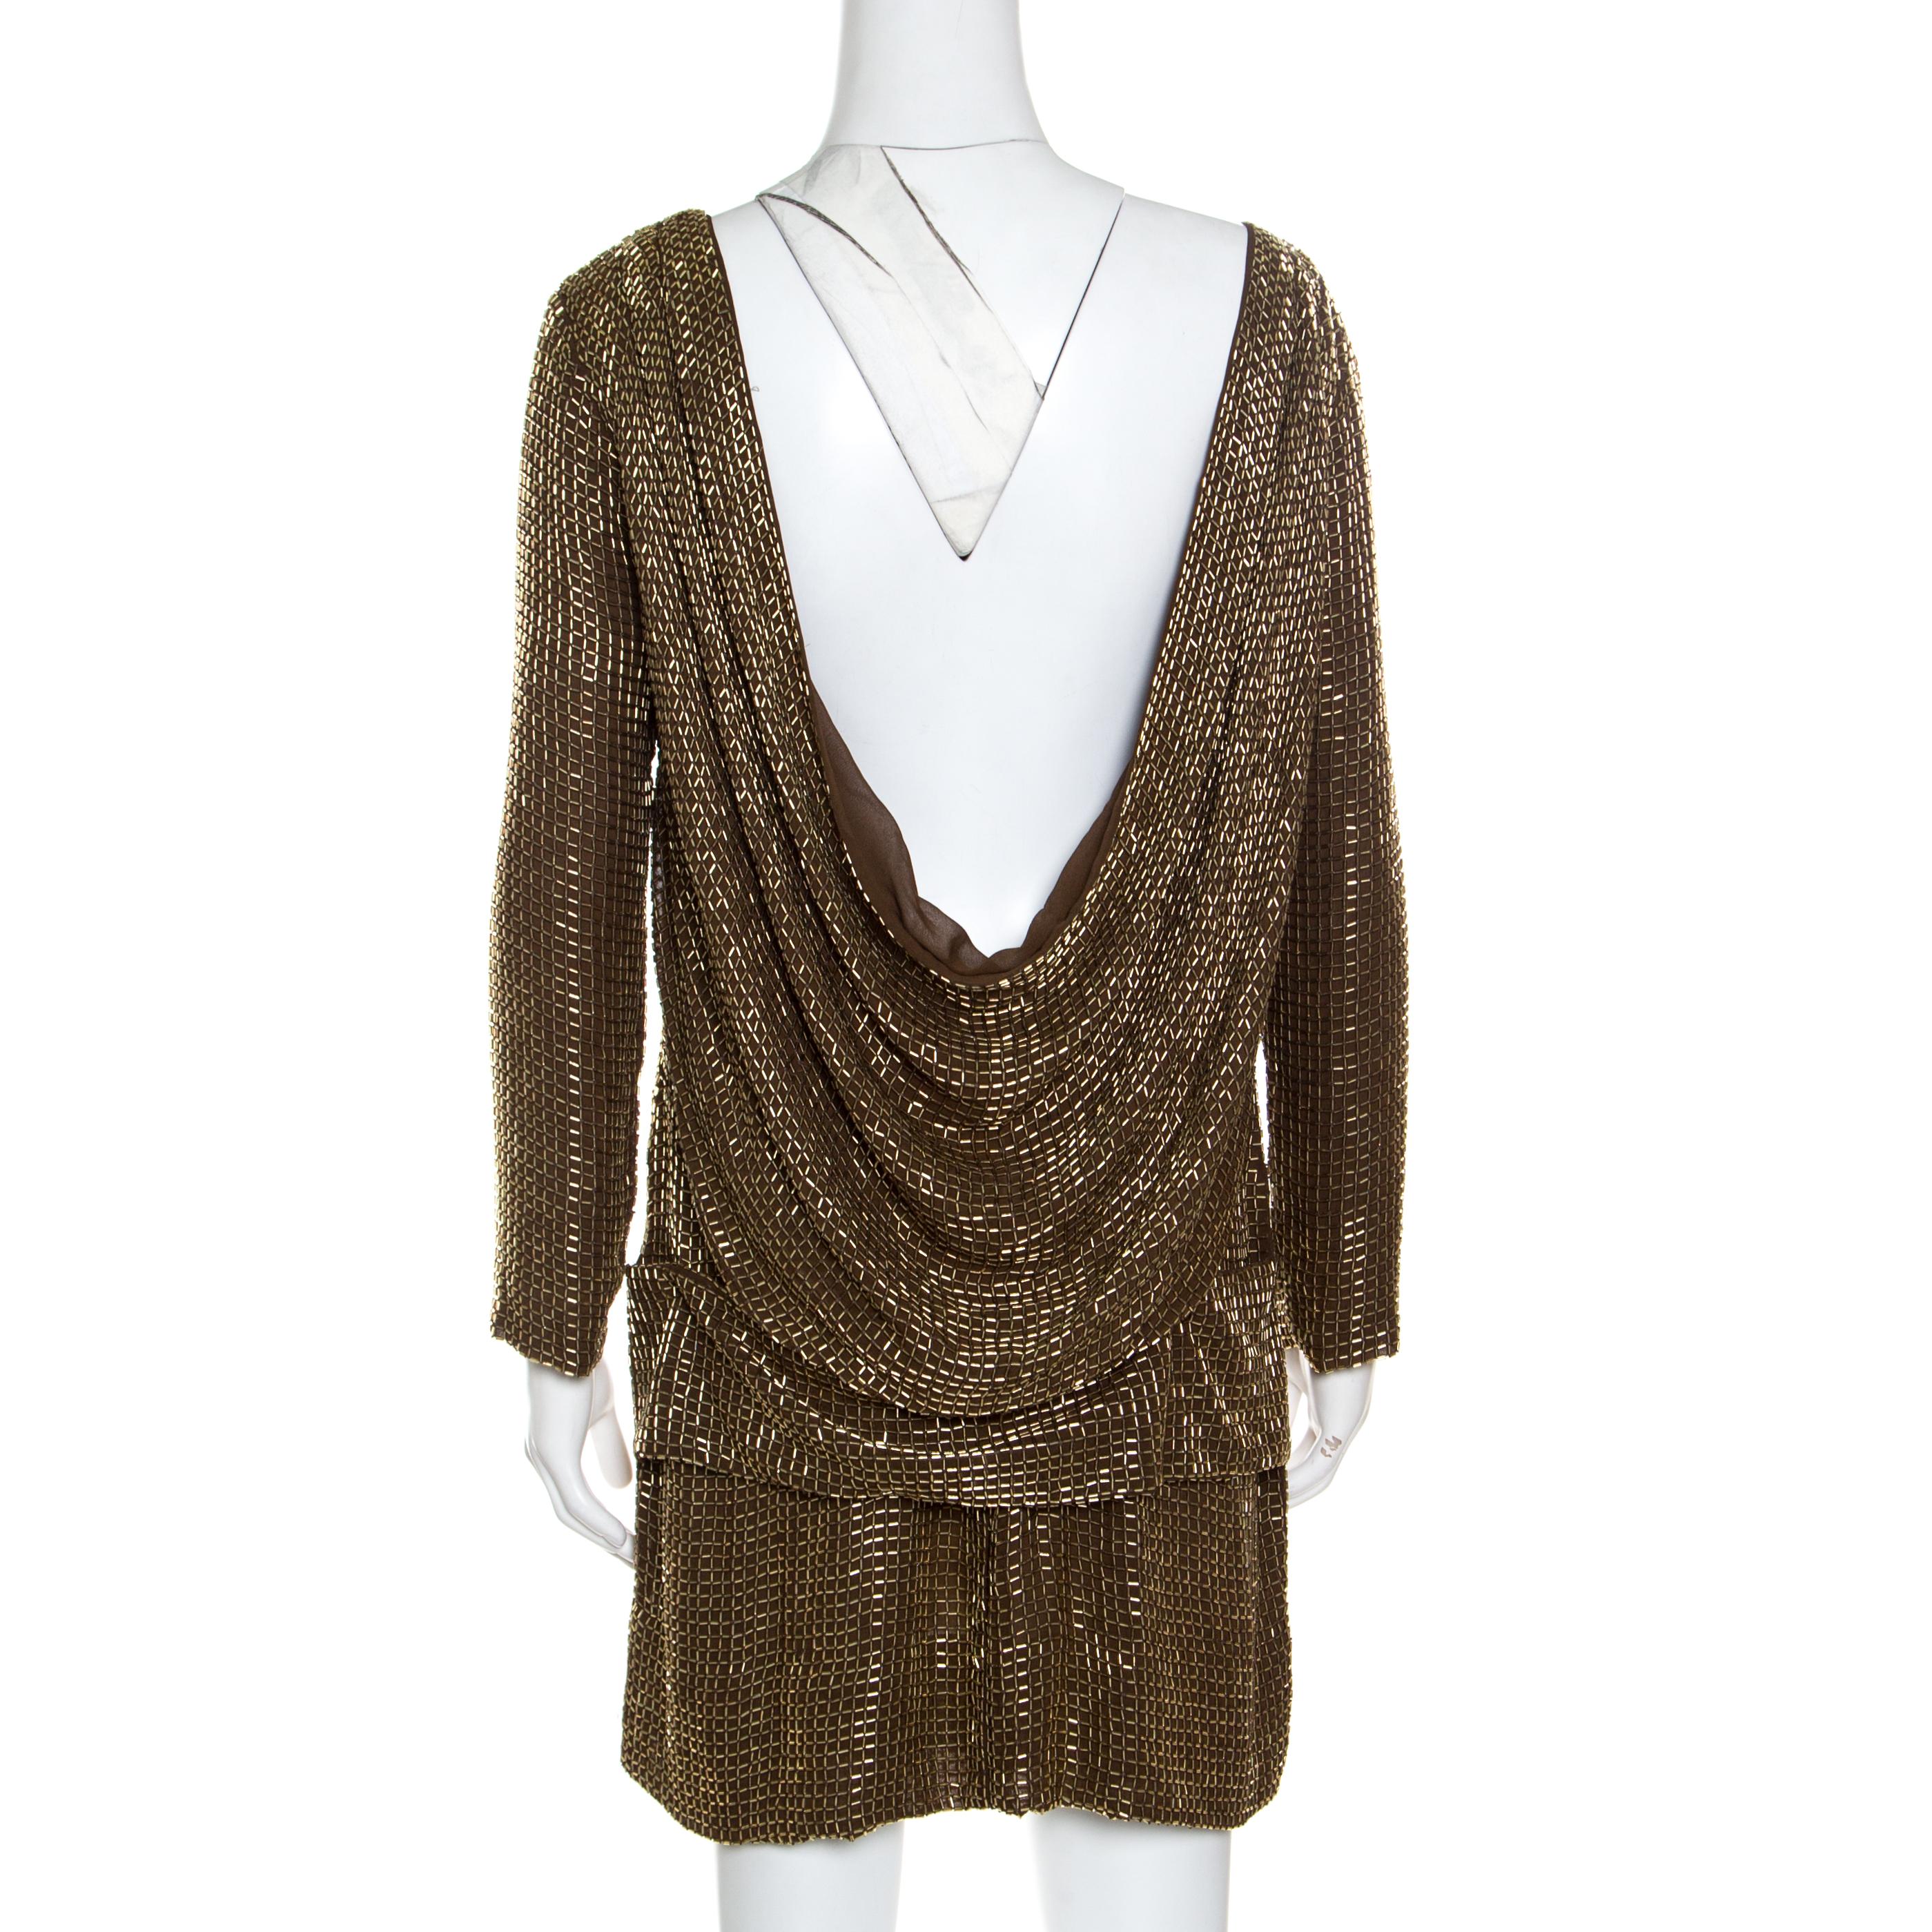 Prep for a glitzy event in this sensational Tom Ford dress. It is well-made and simply stunning to look at which in turn guarantees that it will look great on you. It is covered in beads and designed with long sleeves and an open draped